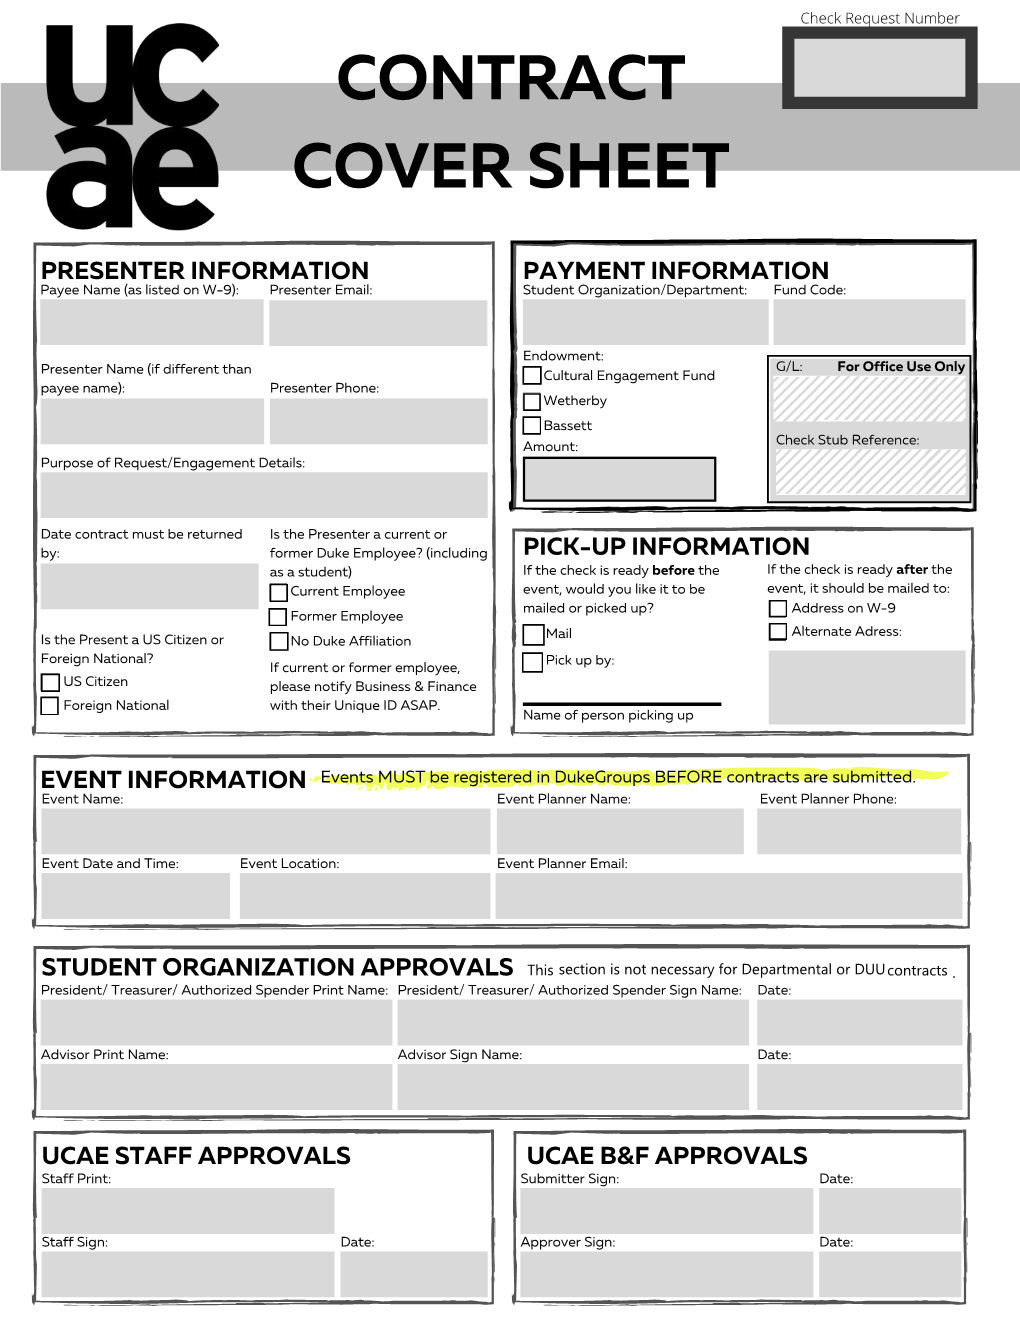 Student Organization Contract with Cover Sheet